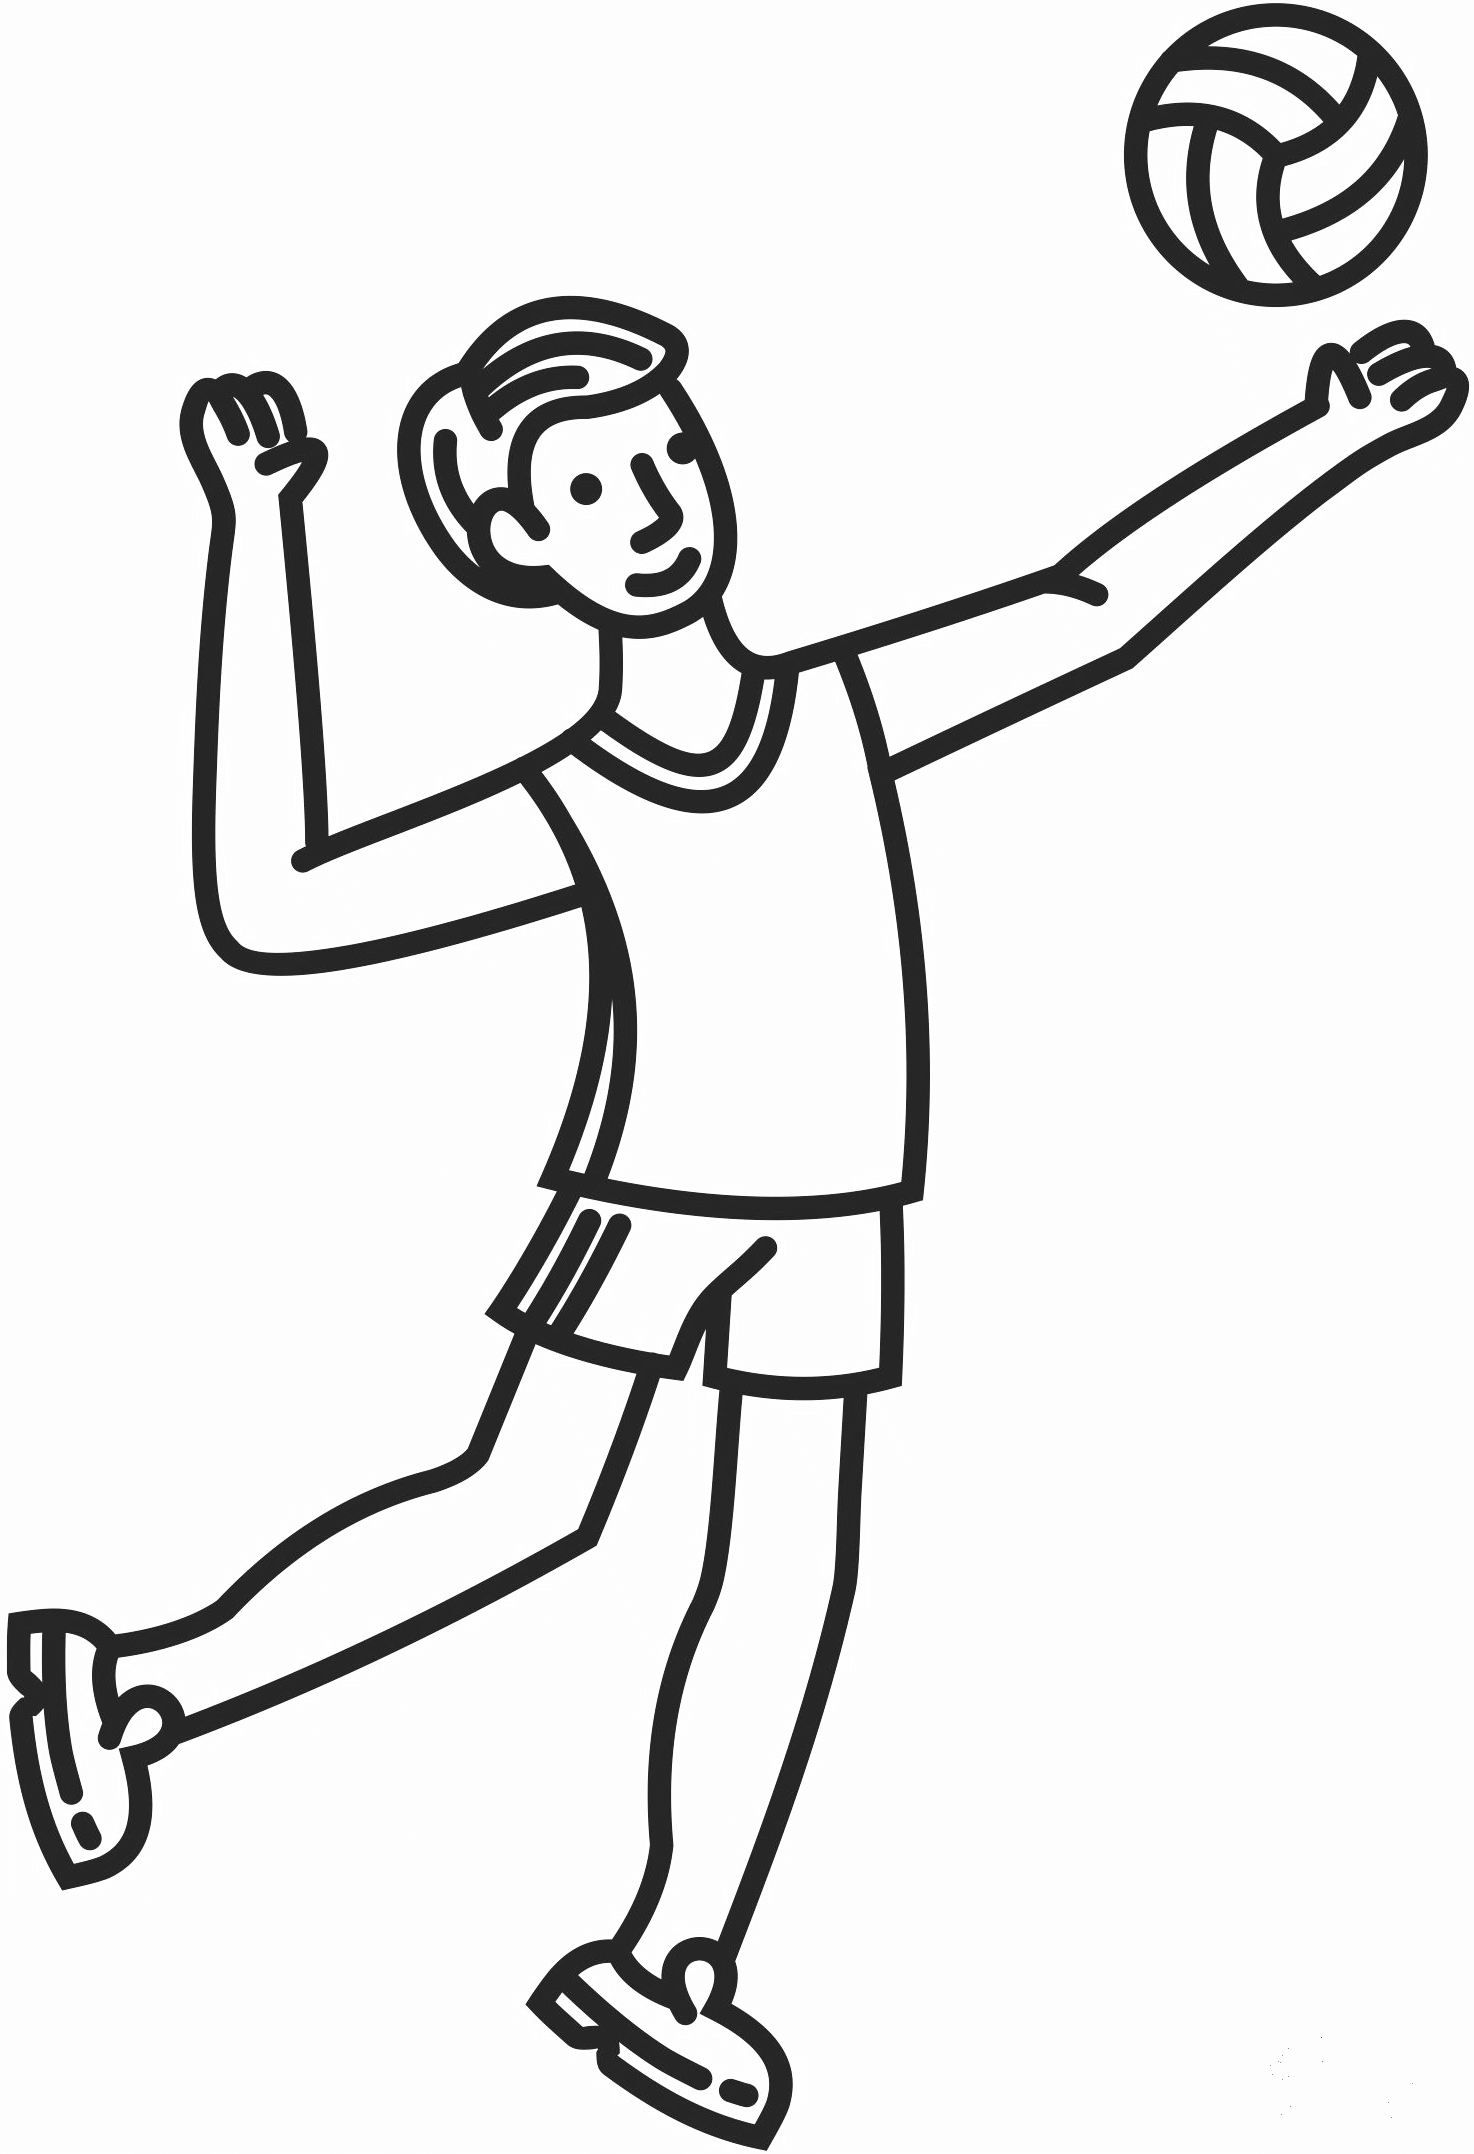 Volleyball Player coloring page - ColouringPages